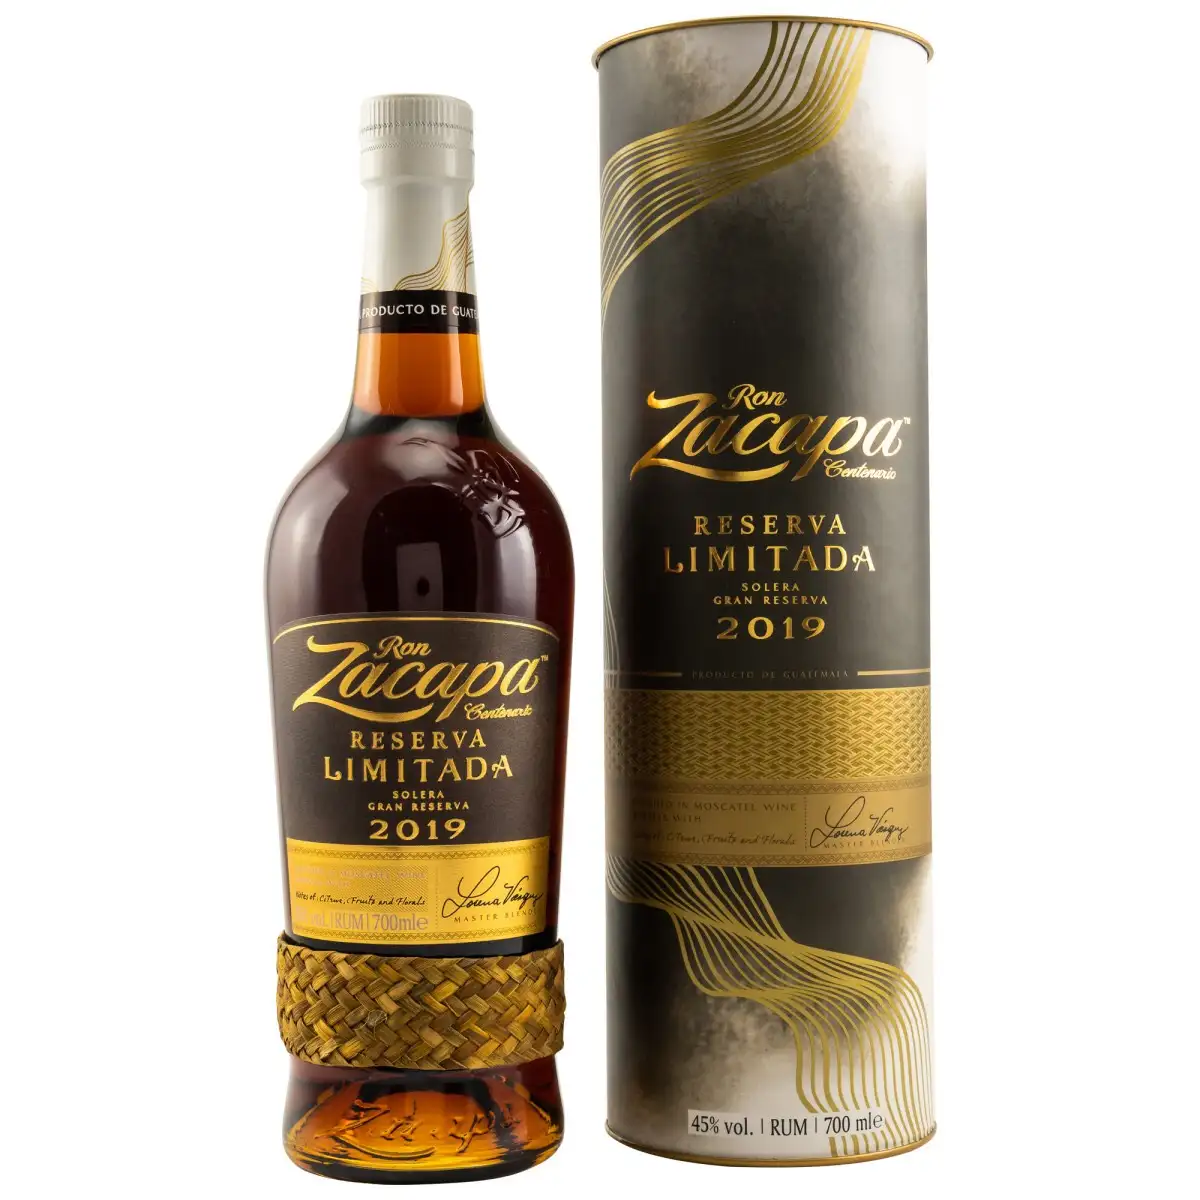 Image of the front of the bottle of the rum Ron Zacapa Reserva Limitada